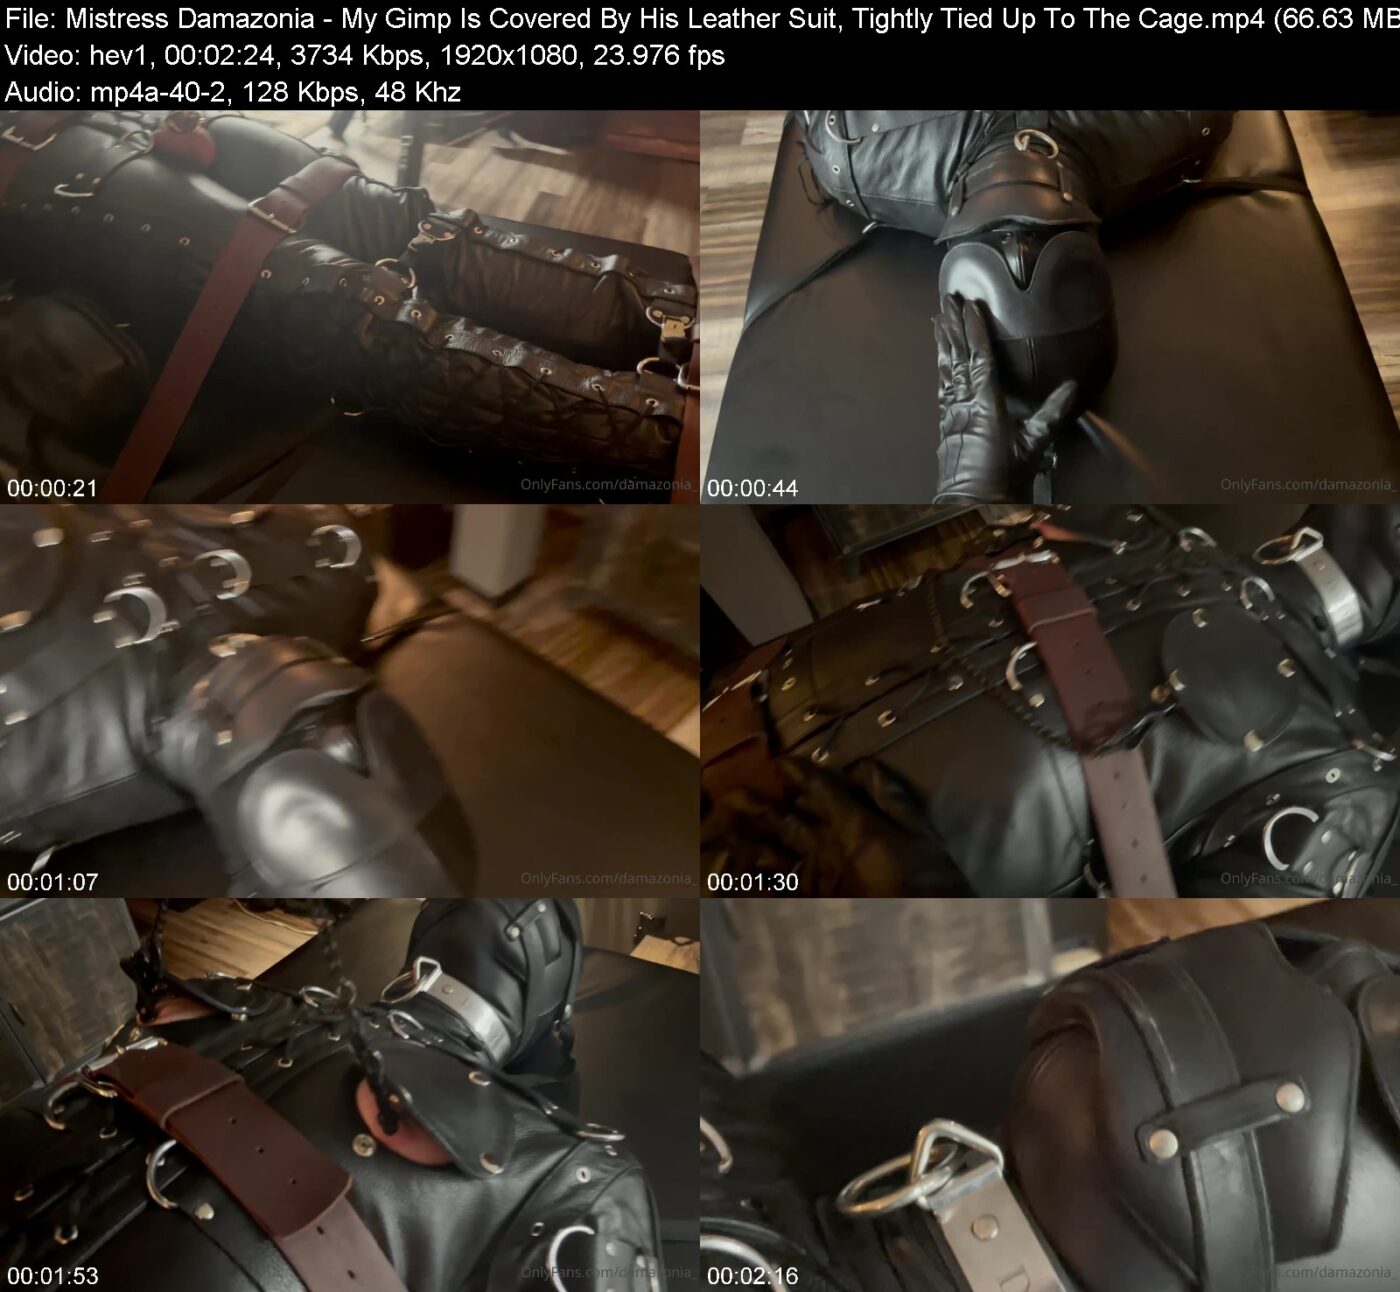 Mistress Damazonia - My Gimp Is Covered By His Leather Suit, Tightly Tied Up To The Cage